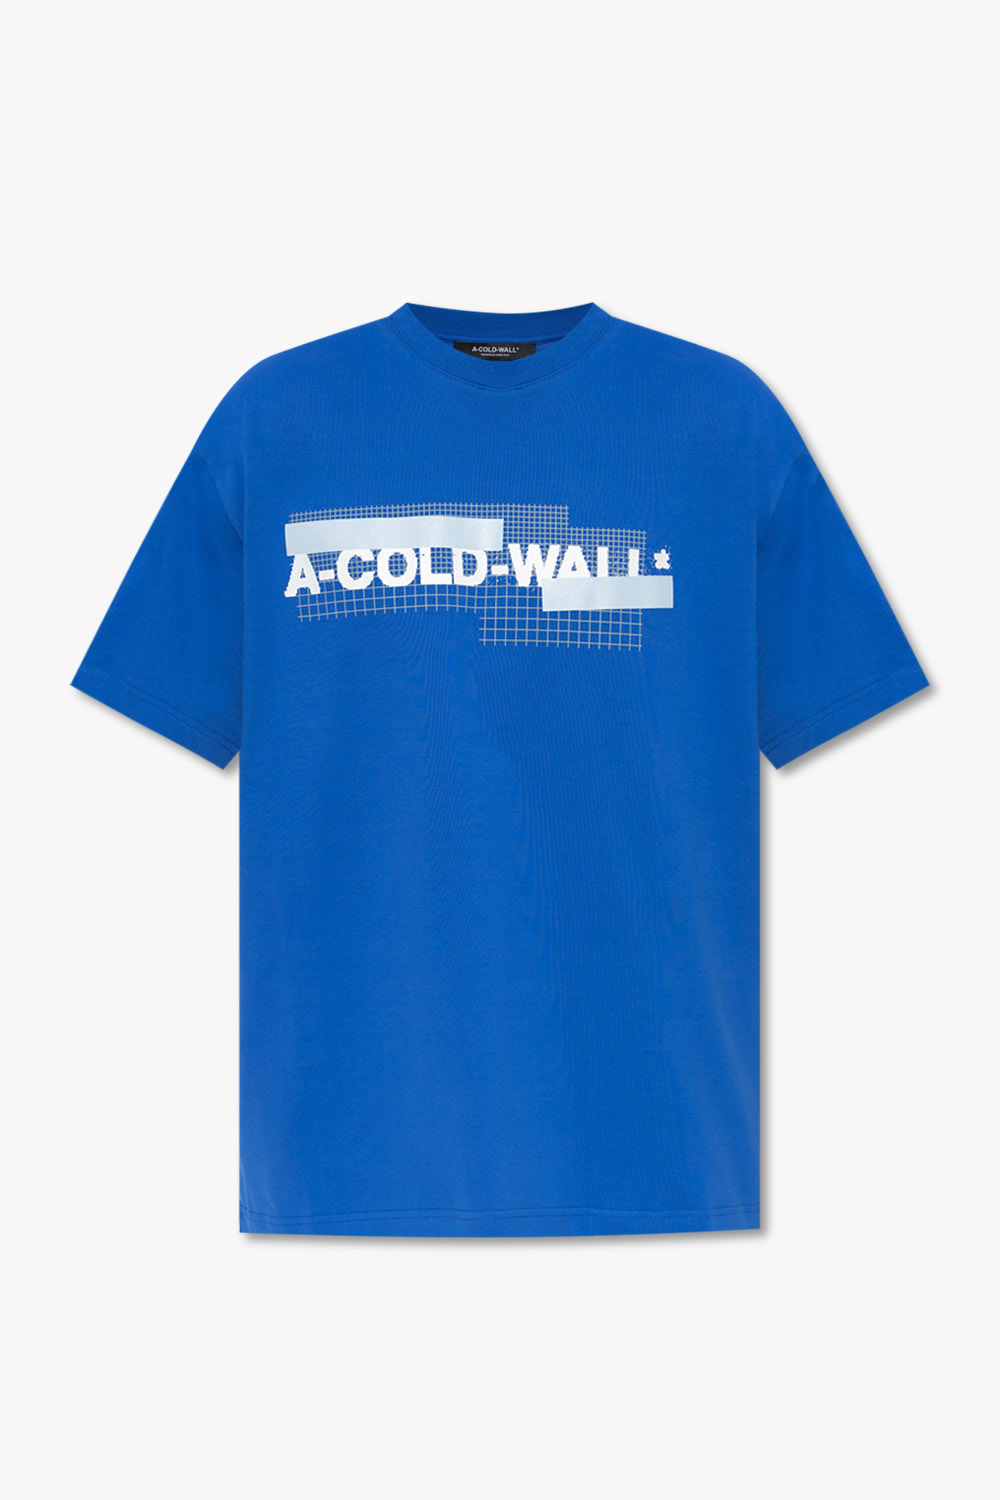 A-COLD-WALL* T-shirt with logo | Men's Clothing | Vitkac